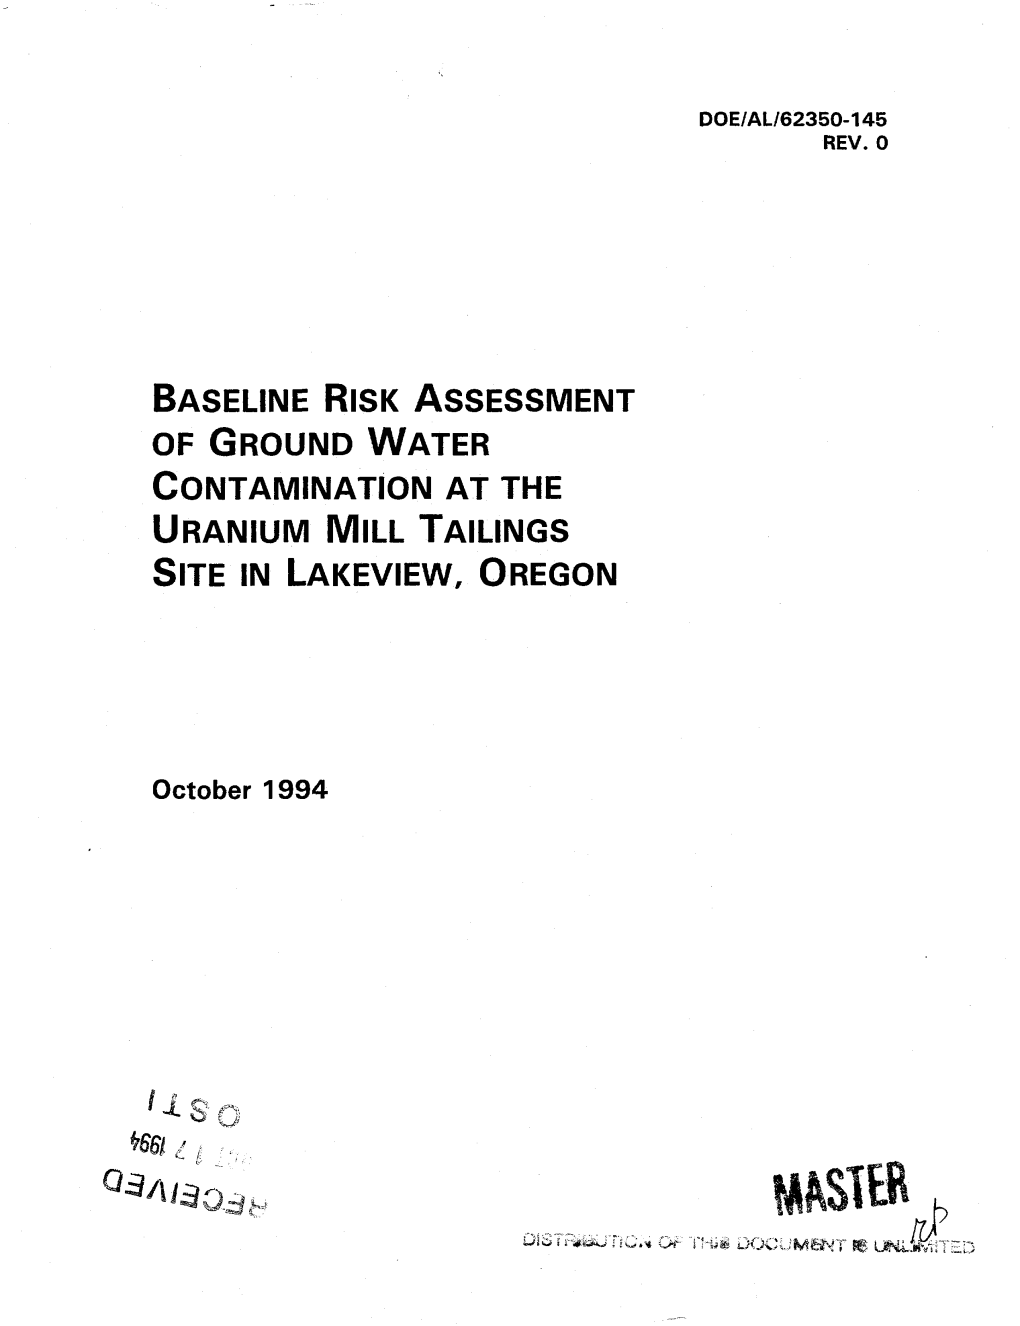 Baseline Risk Assessment of Ground Water Contamination at the Uranium Mill Tailings Site in Lakeview, Oregon